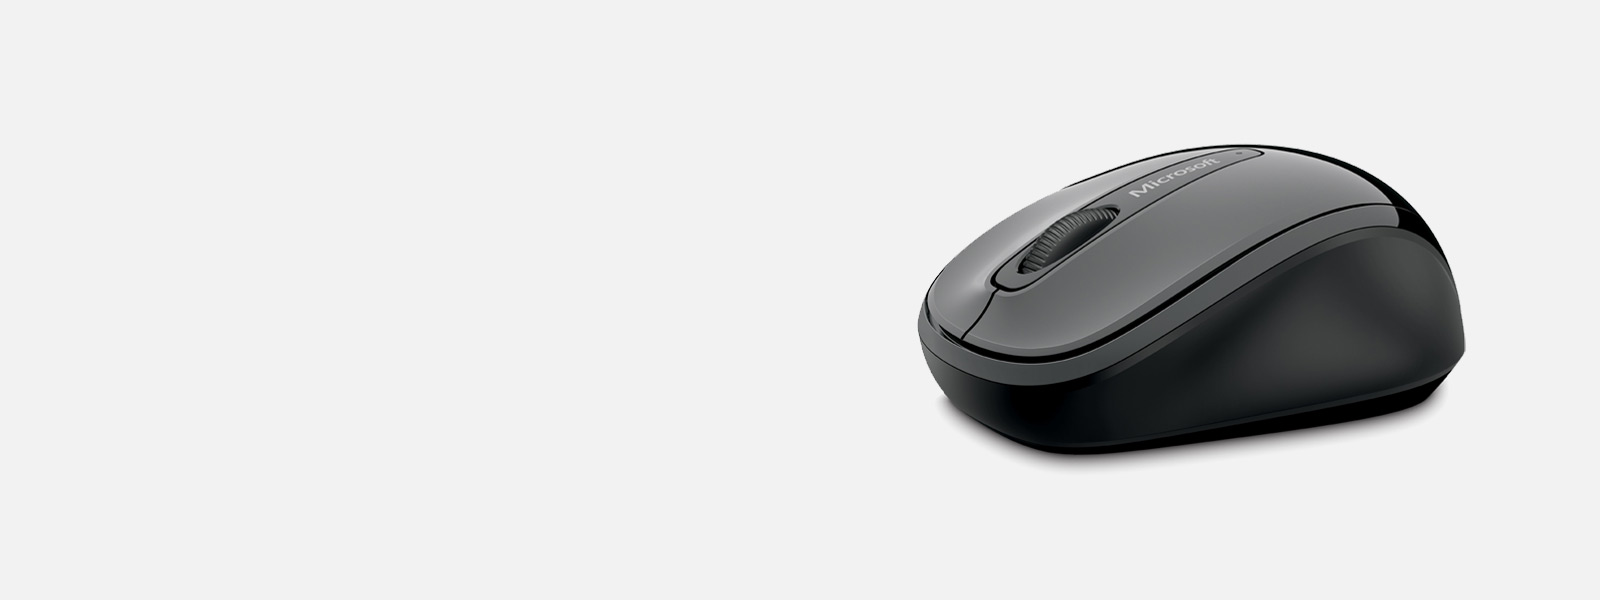 Wireless Mobile Mouse 3500 | Microsoft Accessories